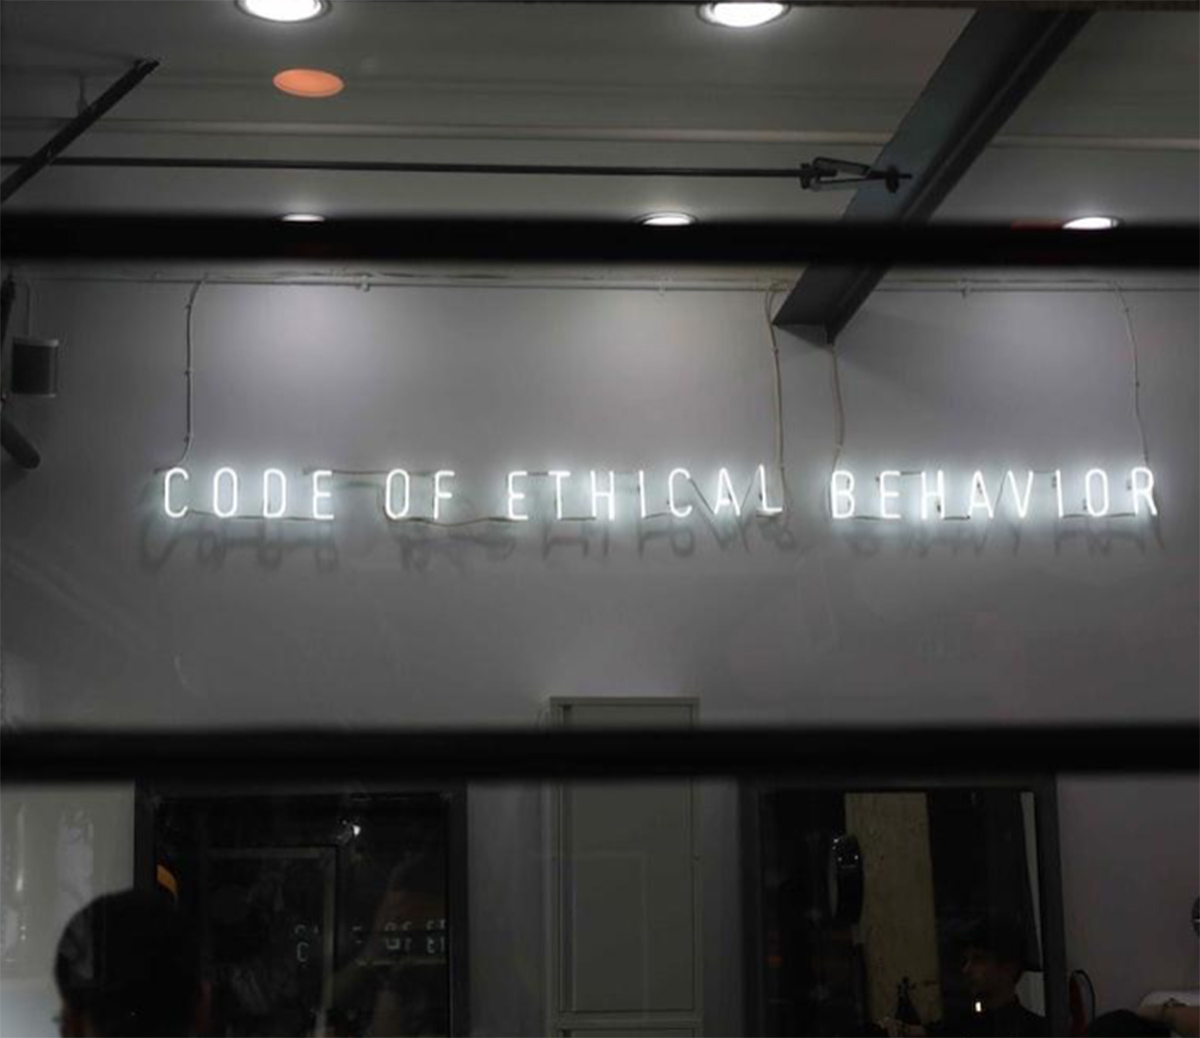 White neon sign that reads "CODE OF ETHICAL BEHAVIOR"